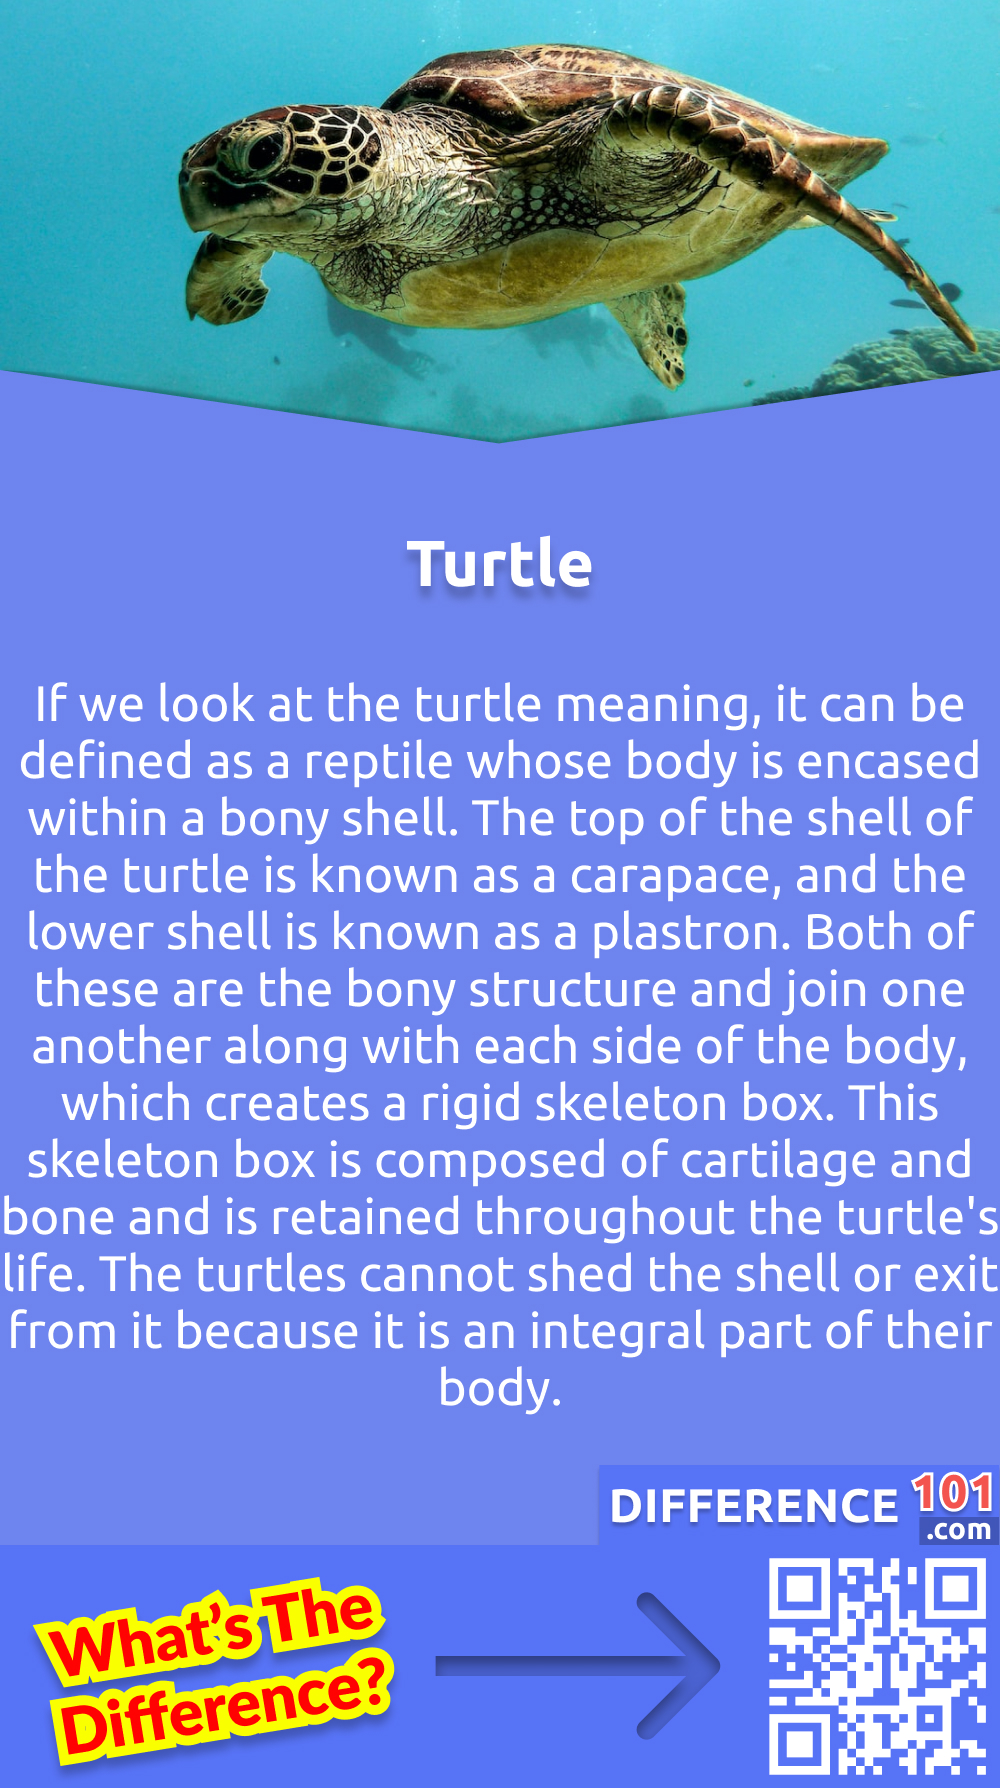 What Is a Turtle? If we look at the turtle meaning, it can be defined as a reptile whose body is encased within a bony shell. Although there are a lot of invertebrate animals and mammals, which have evolved shells, none of them has architecture like a turtle. The top of the shell of the turtle is known as a carapace, and the lower shell is known as a plastron. Both of these are the bony structure and join one another along with each side of the body, which creates a rigid skeleton box. This skeleton box is composed of cartilage and bone and is retained throughout the turtle's life. The turtles cannot shed the shell or exit from it because it is an integral part of their body. There are almost 365 species of turtle which live on the land and on all of the other continents except Antarctica.